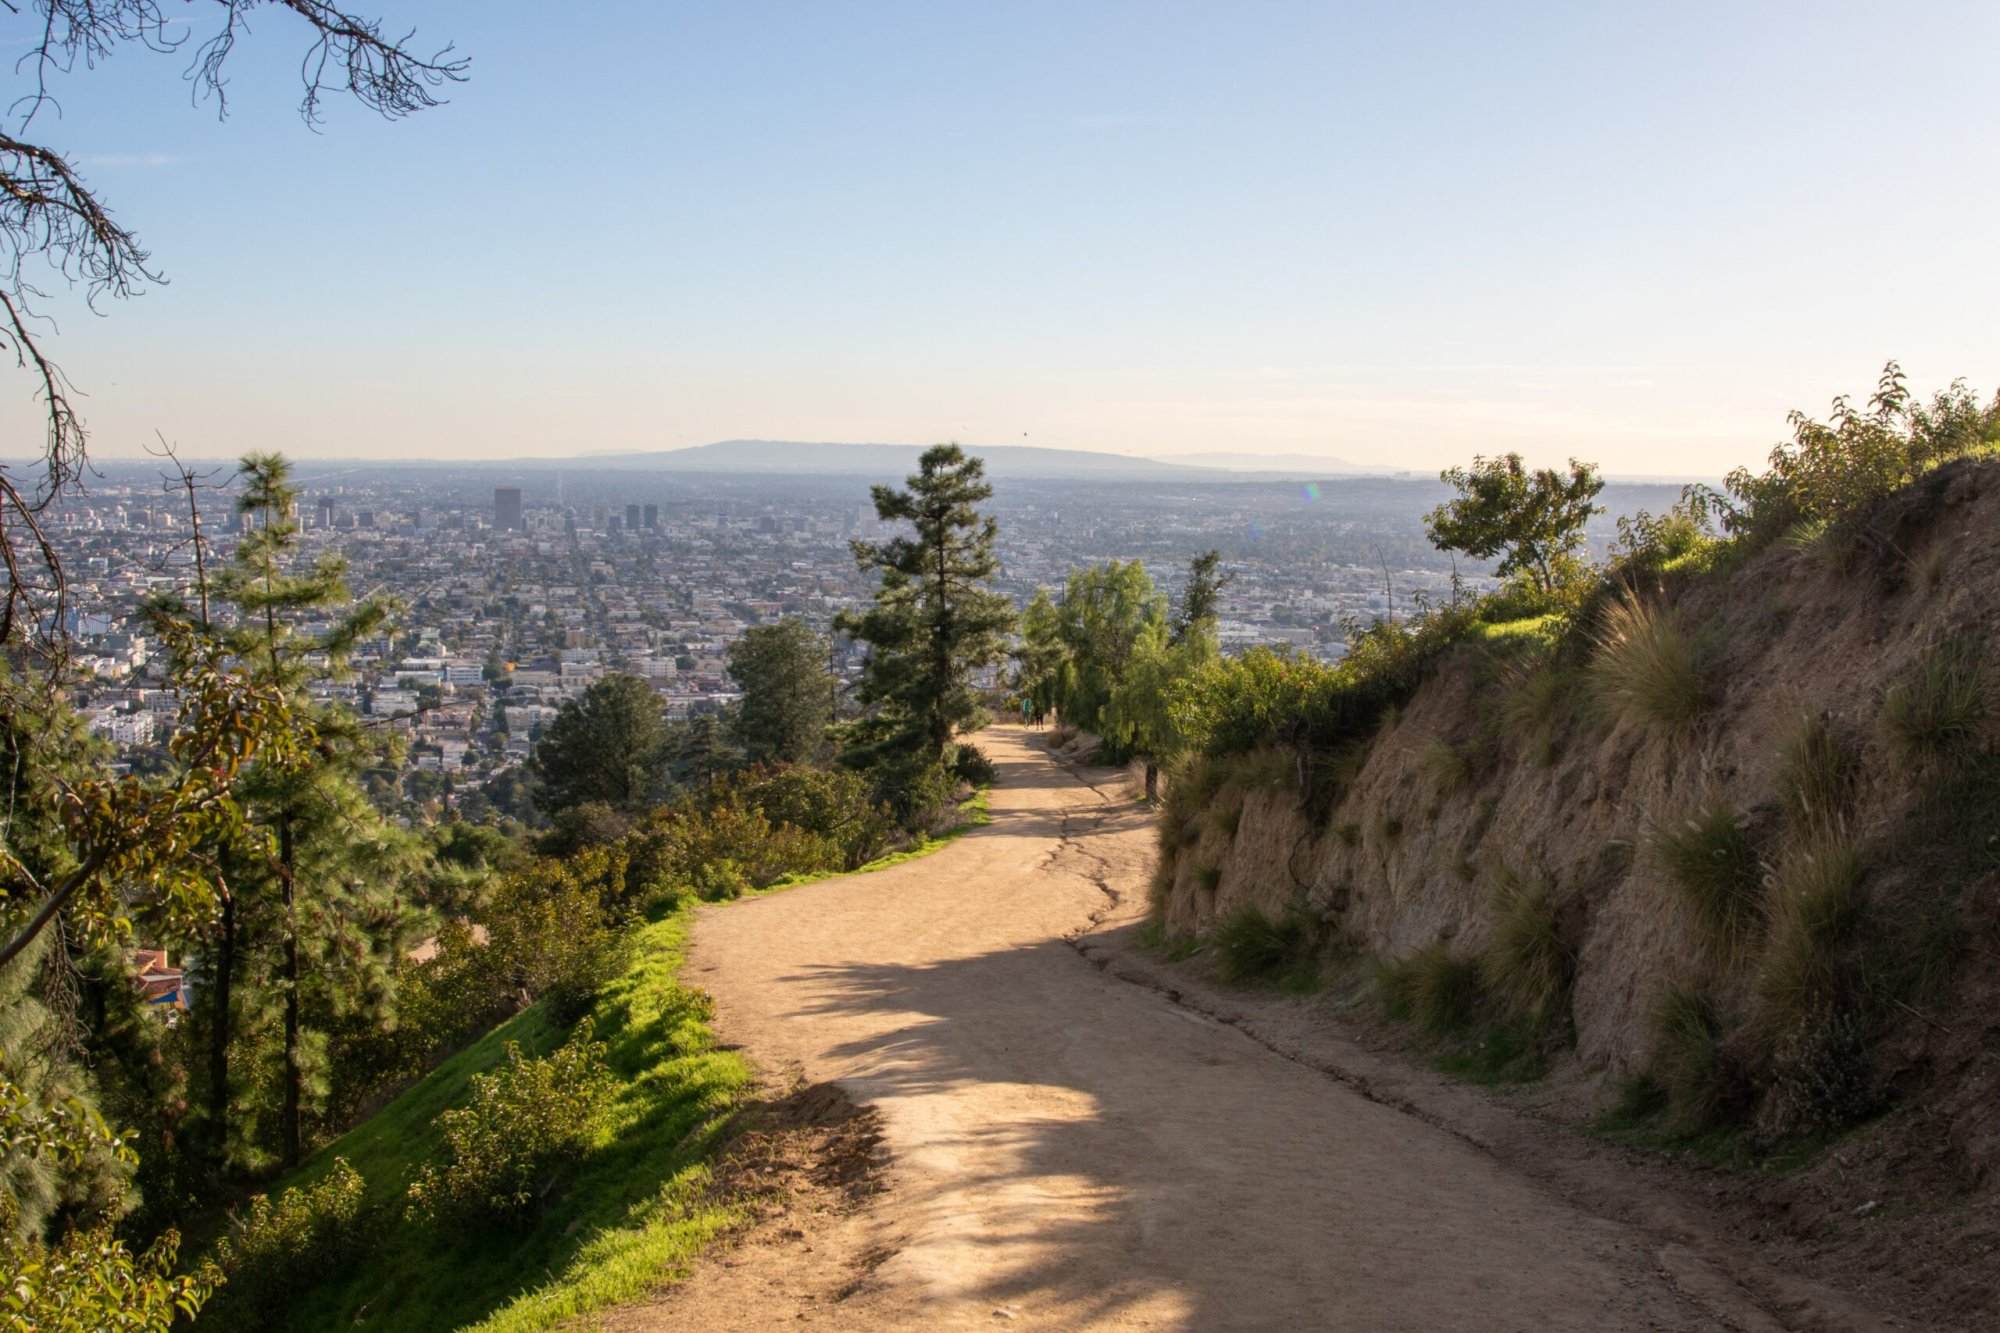 A dirt path leading up to a hill in los angeles.